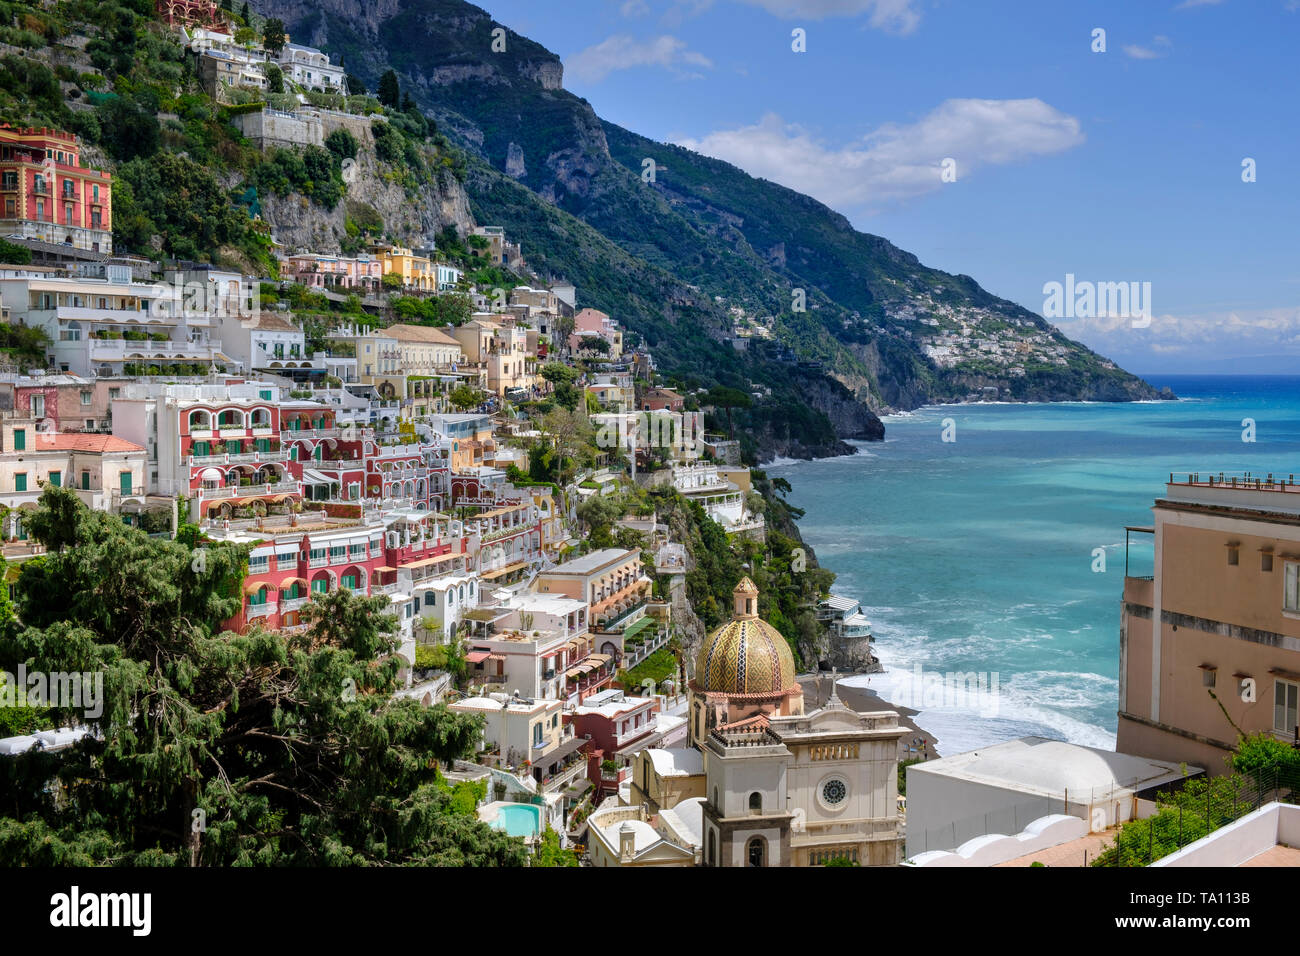 Positano popular holiday destination on the Amalfi Coast in Campania Southern Italy. Dome of Santa Maria Assunta cathedral in foreground. Stock Photo